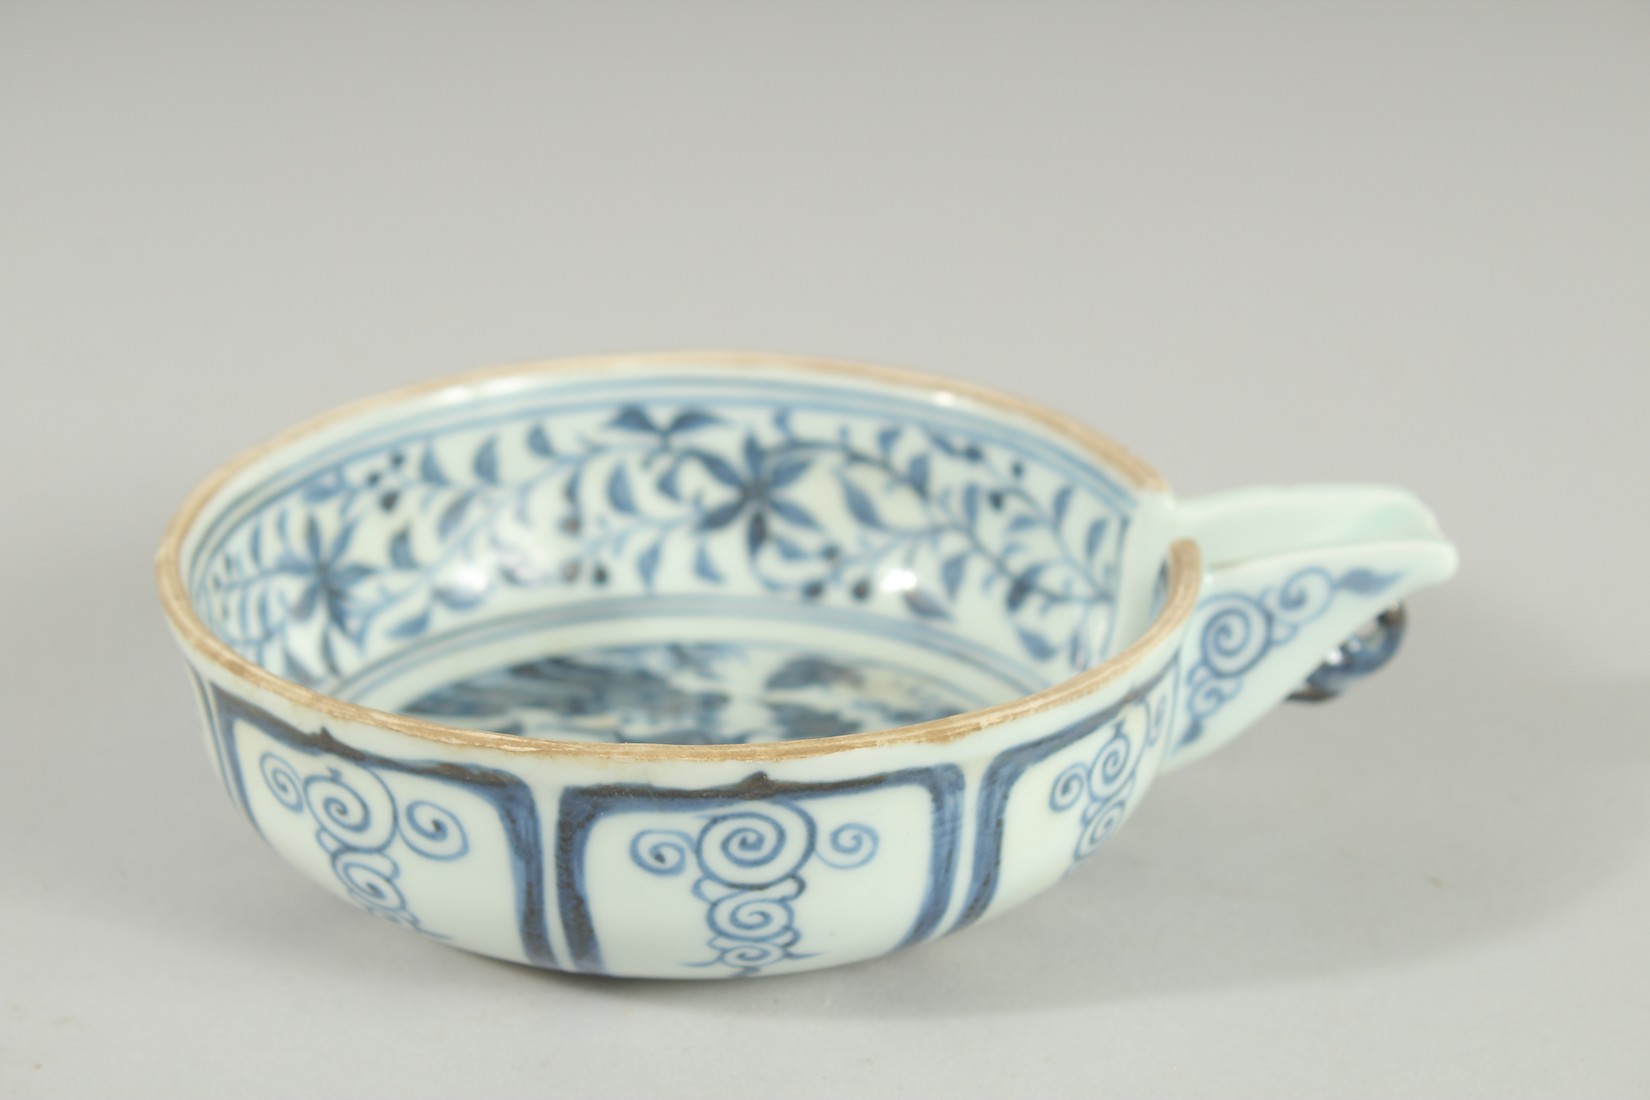 A CHINESE BLUE AND WHITE PORCELAIN OIL CUP, painted with a rabbit, 13cm diameter (excluding spout). - Image 2 of 4